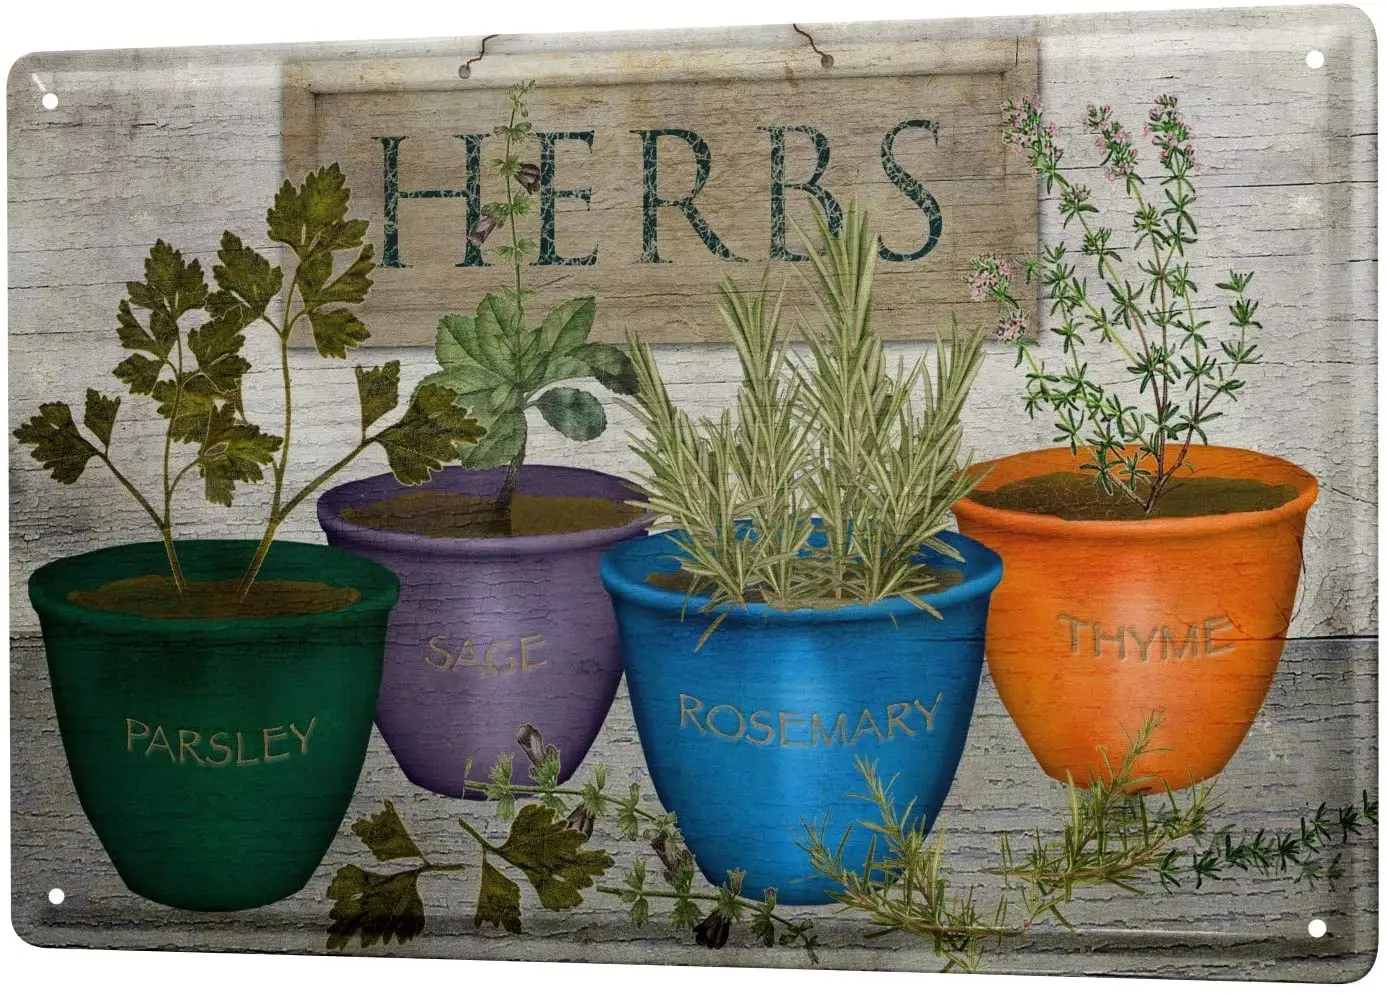 

SINCE 2004 Tin Sign Metal Plate Decorative Sign Home Decor Plaques Kitchen Decor Parsley sage Rosemary Thyme Potted Herbs 8X12